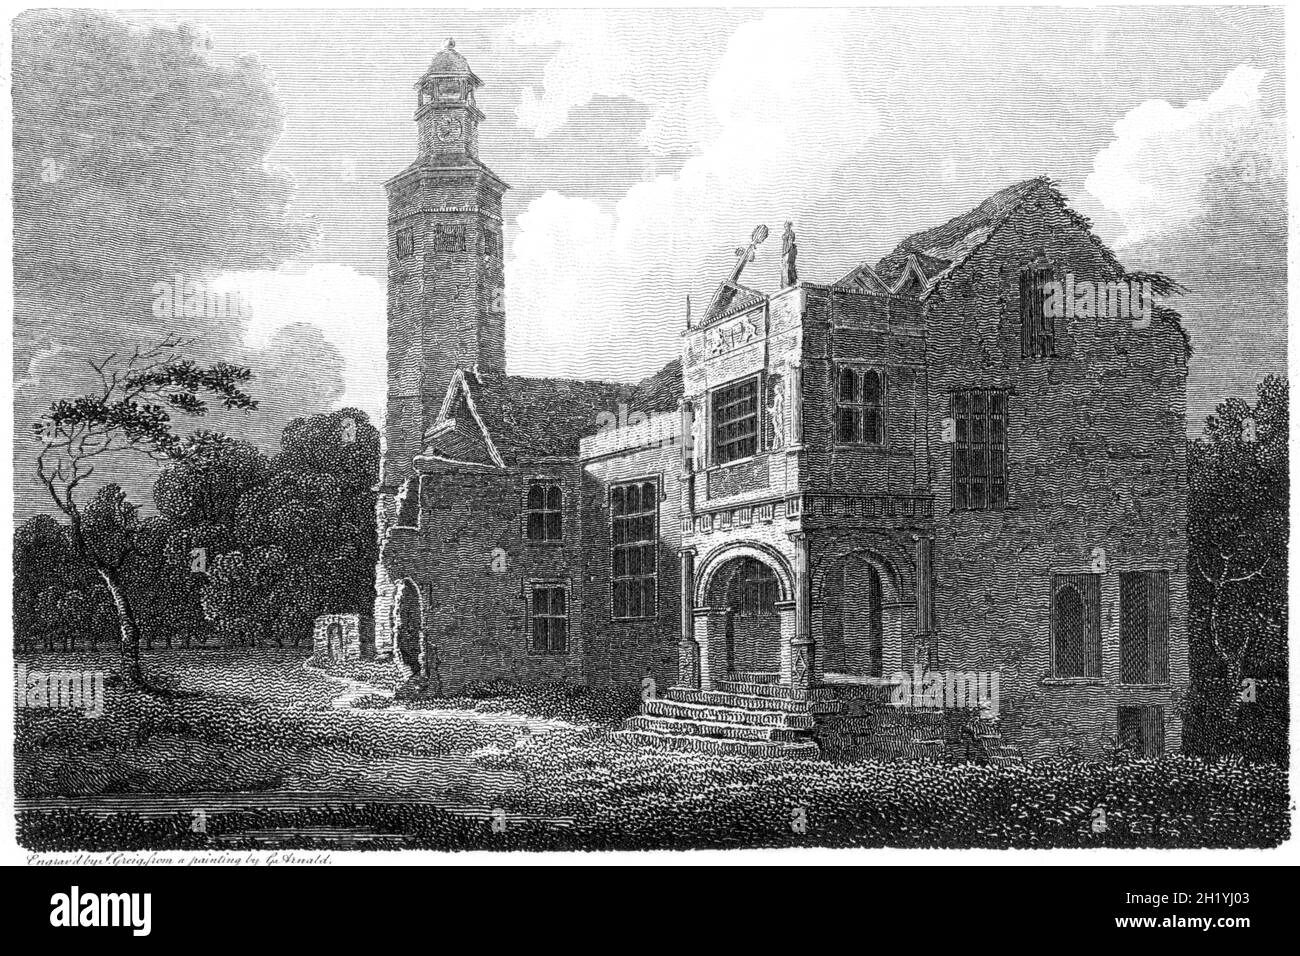 An engraving of the Remains of Gorhambury House, Hertfordshire scanned at high resolution from a book printed in 1812. Believed copyright free. Stock Photo